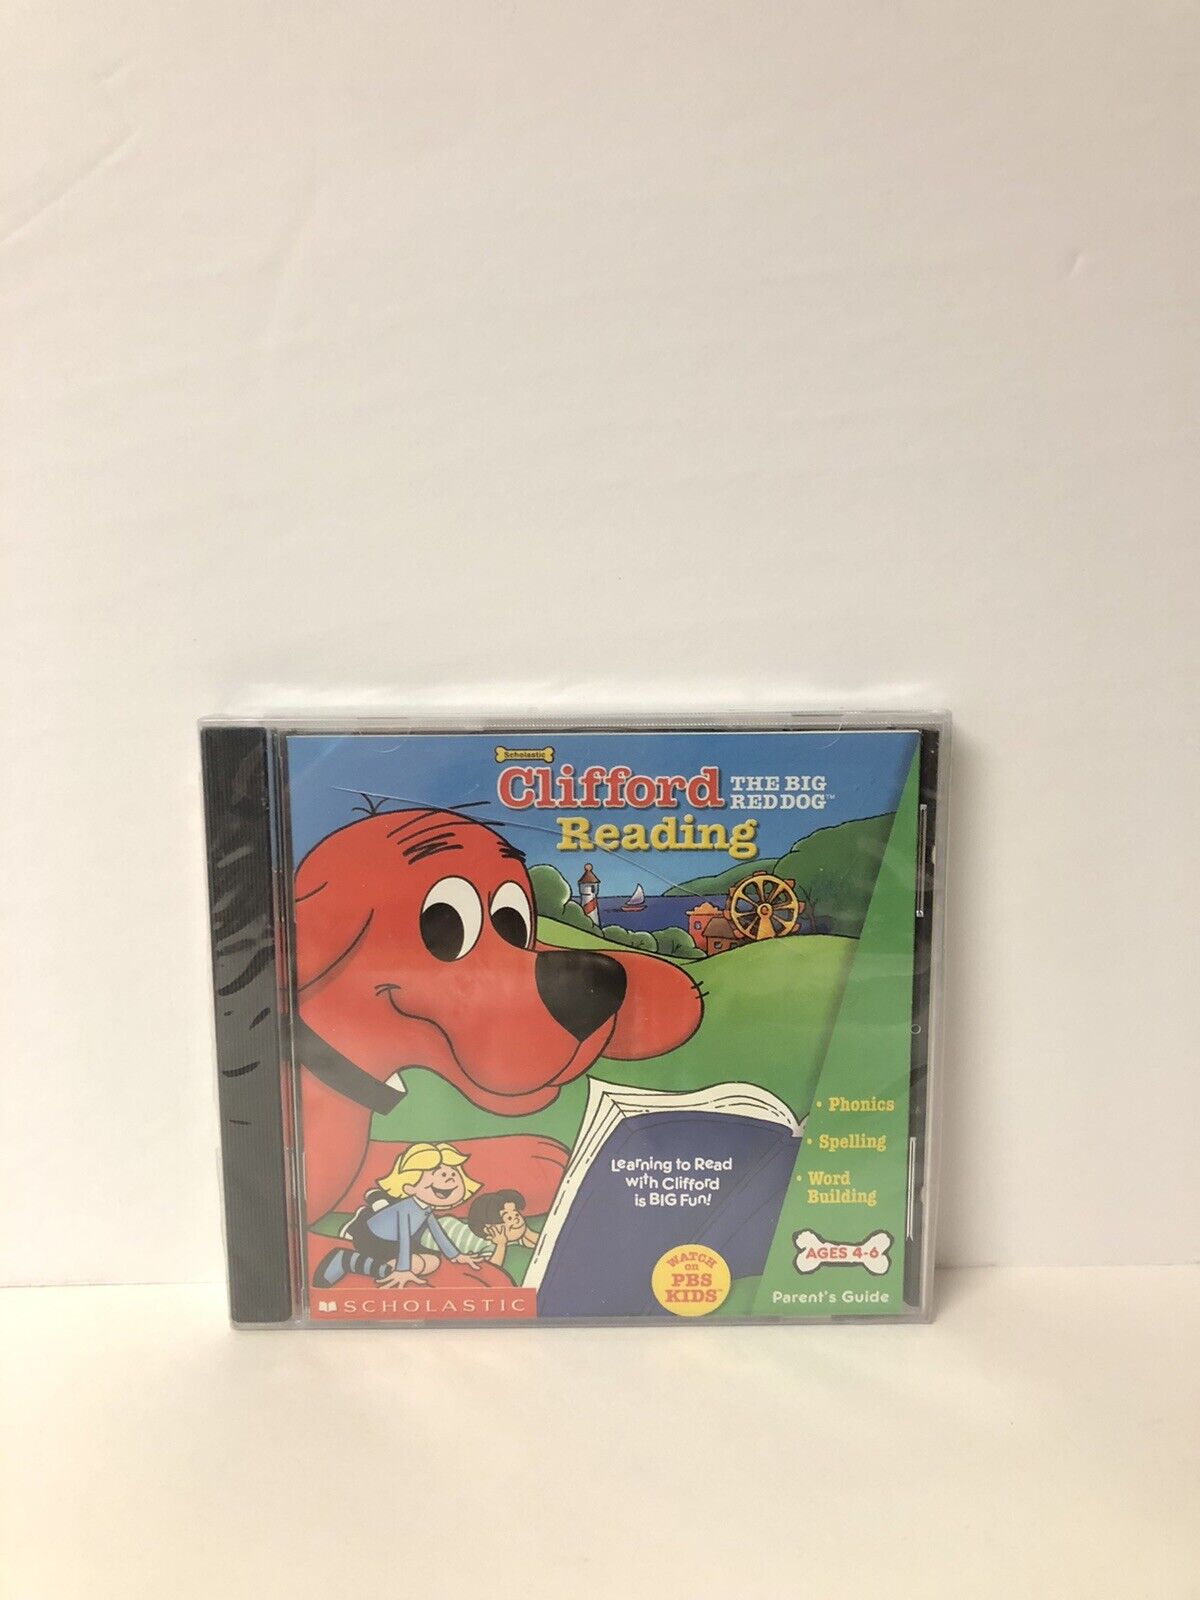 Scholastic Clifford The Big Red Dog Reading CD-ROM 2000 Ages 4-6 NEW SEALED